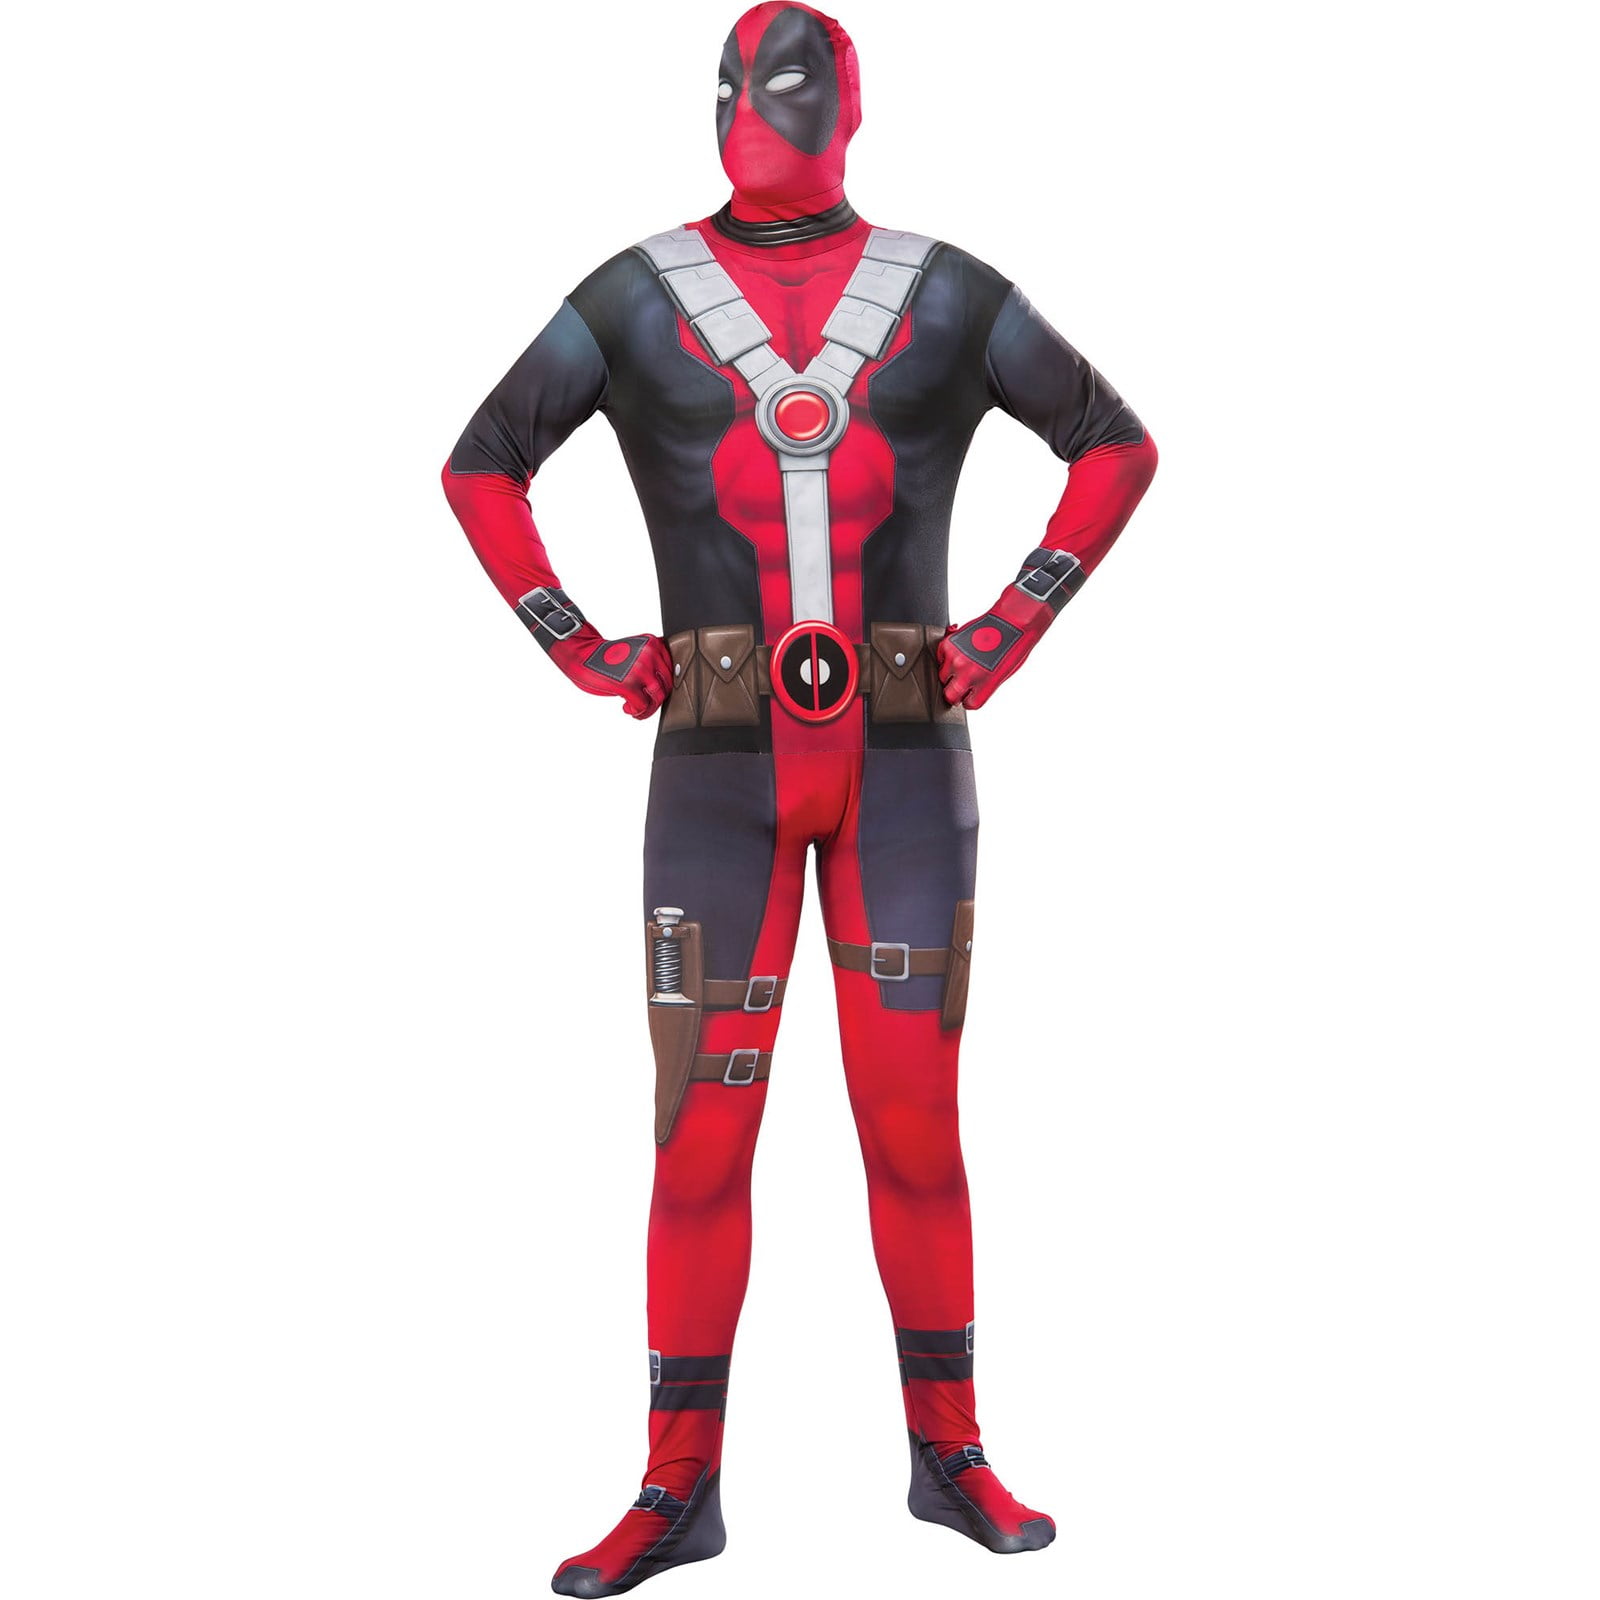 Capital Costumes Adult Spandex Second Skin Full Bodysuit Costume by